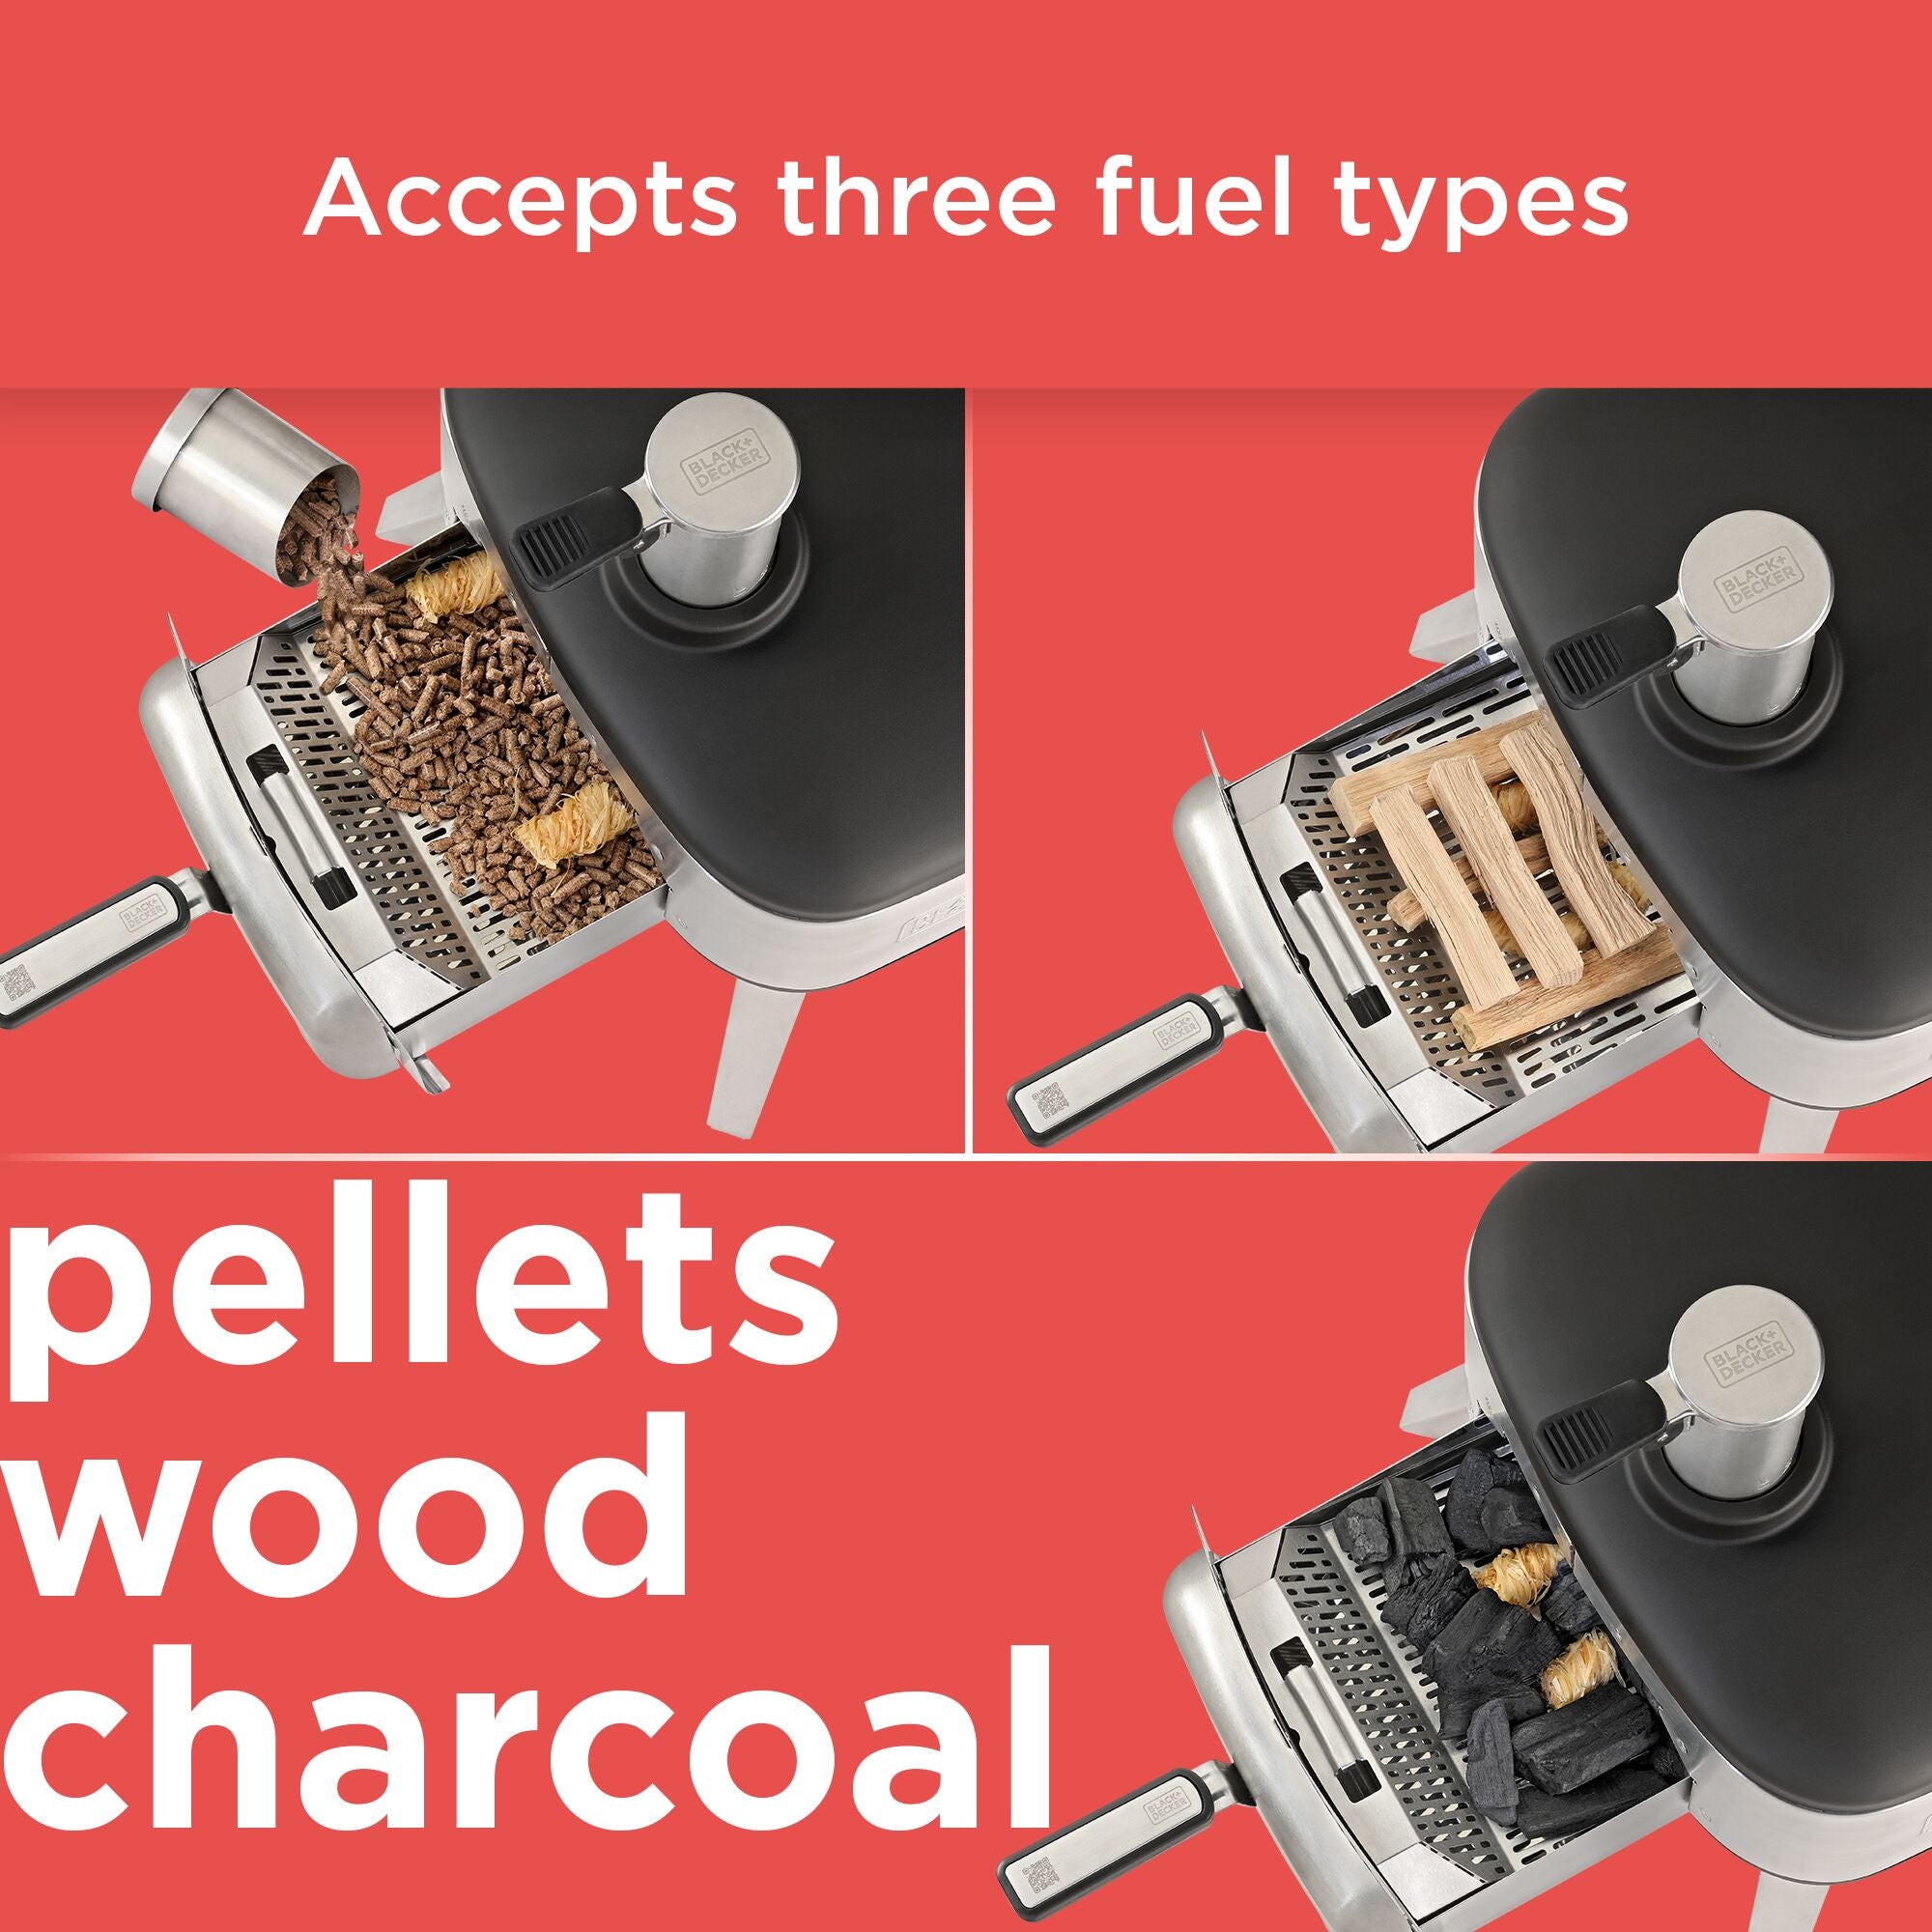 Accepts three types of fuel: charcoal, pellets, and wood